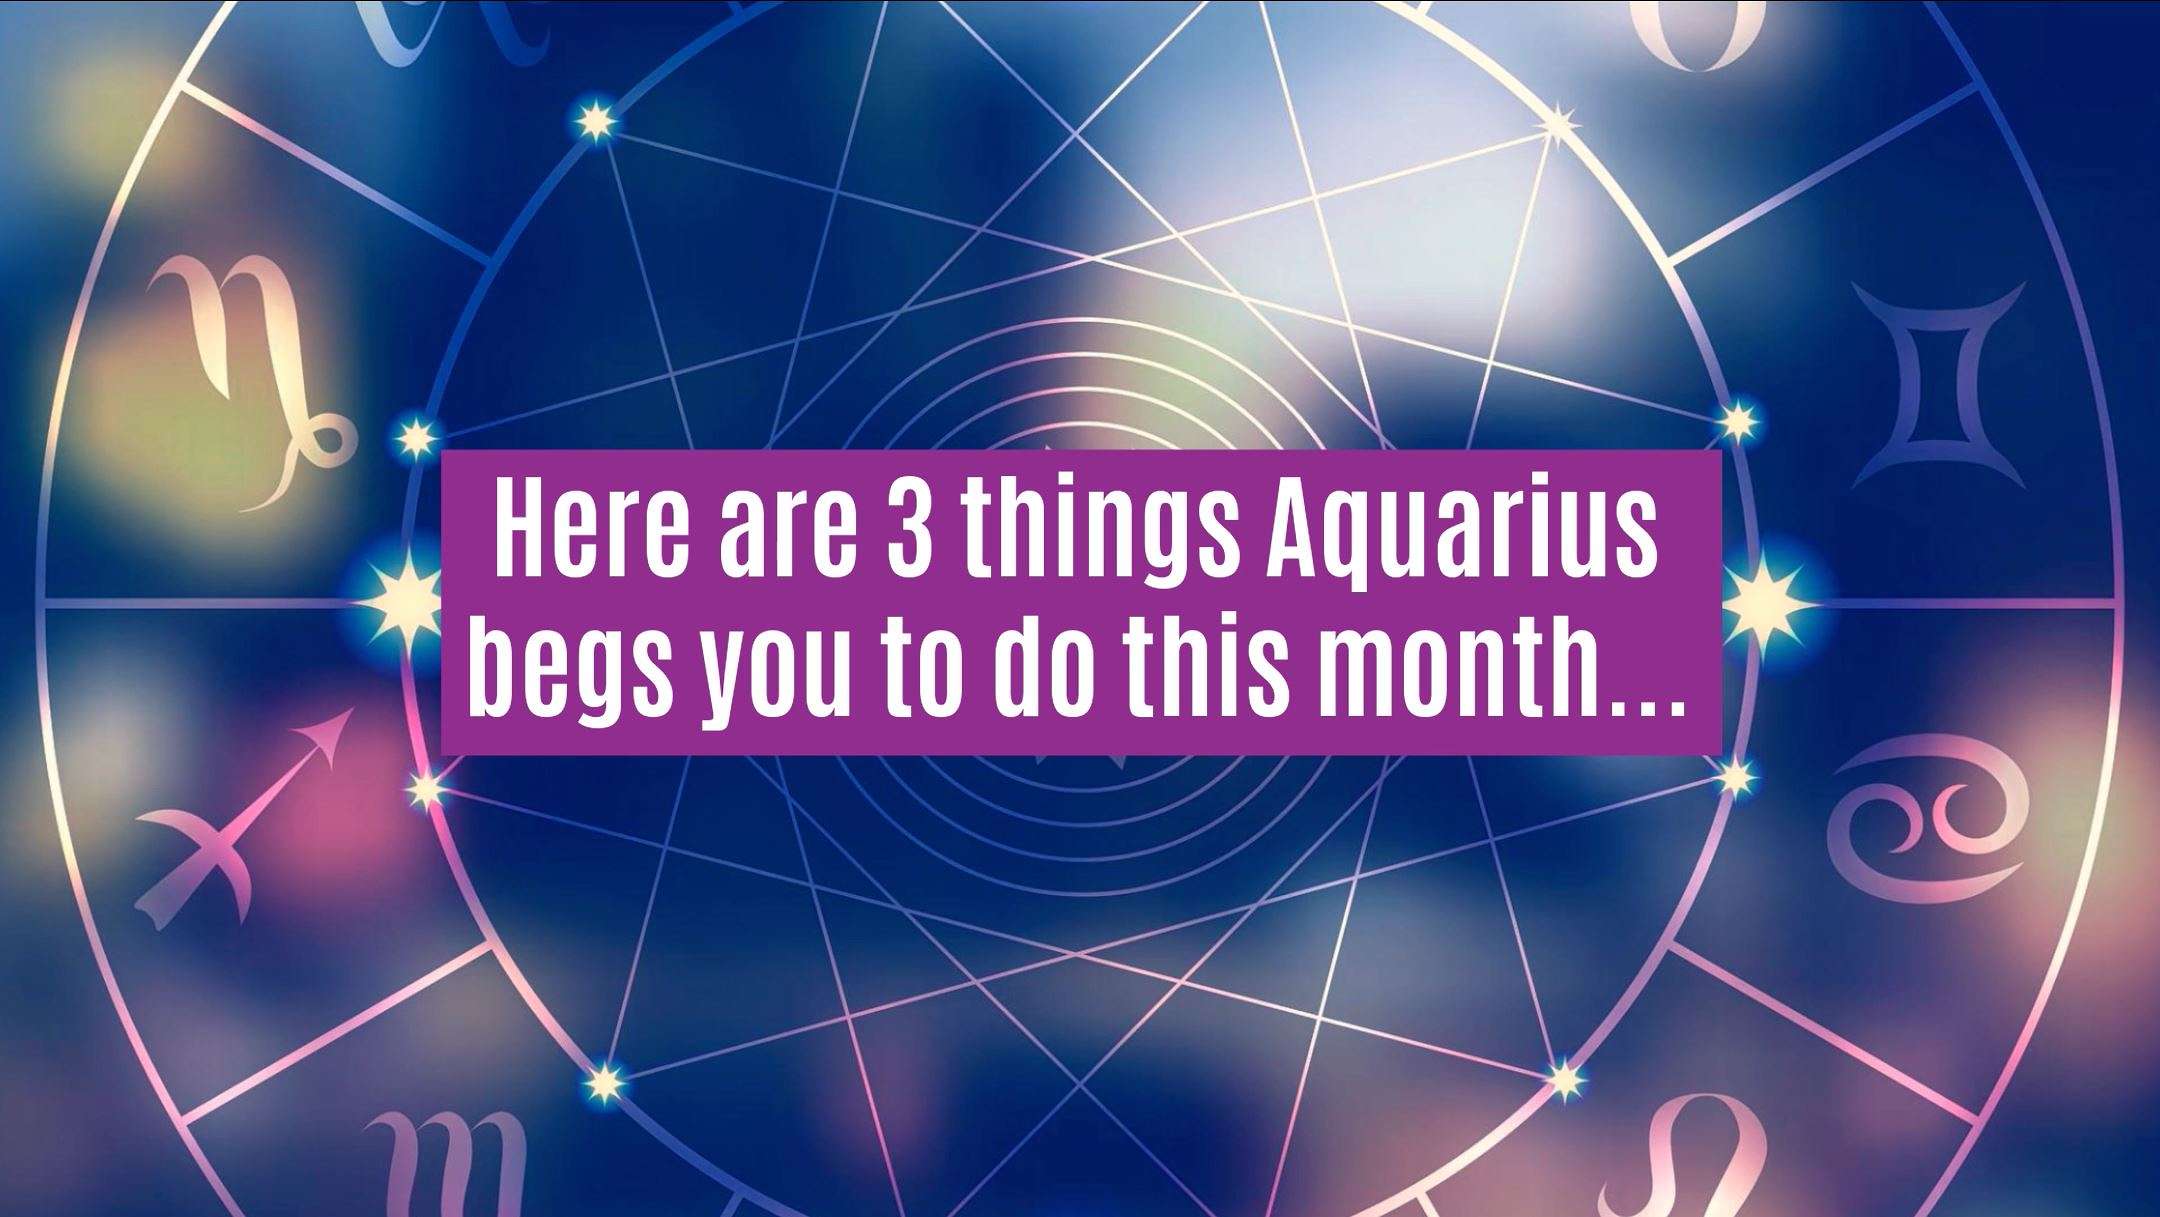 Aquarius Season Starts Now & Here Are 3 Things You NEED To Do! (Jan 20